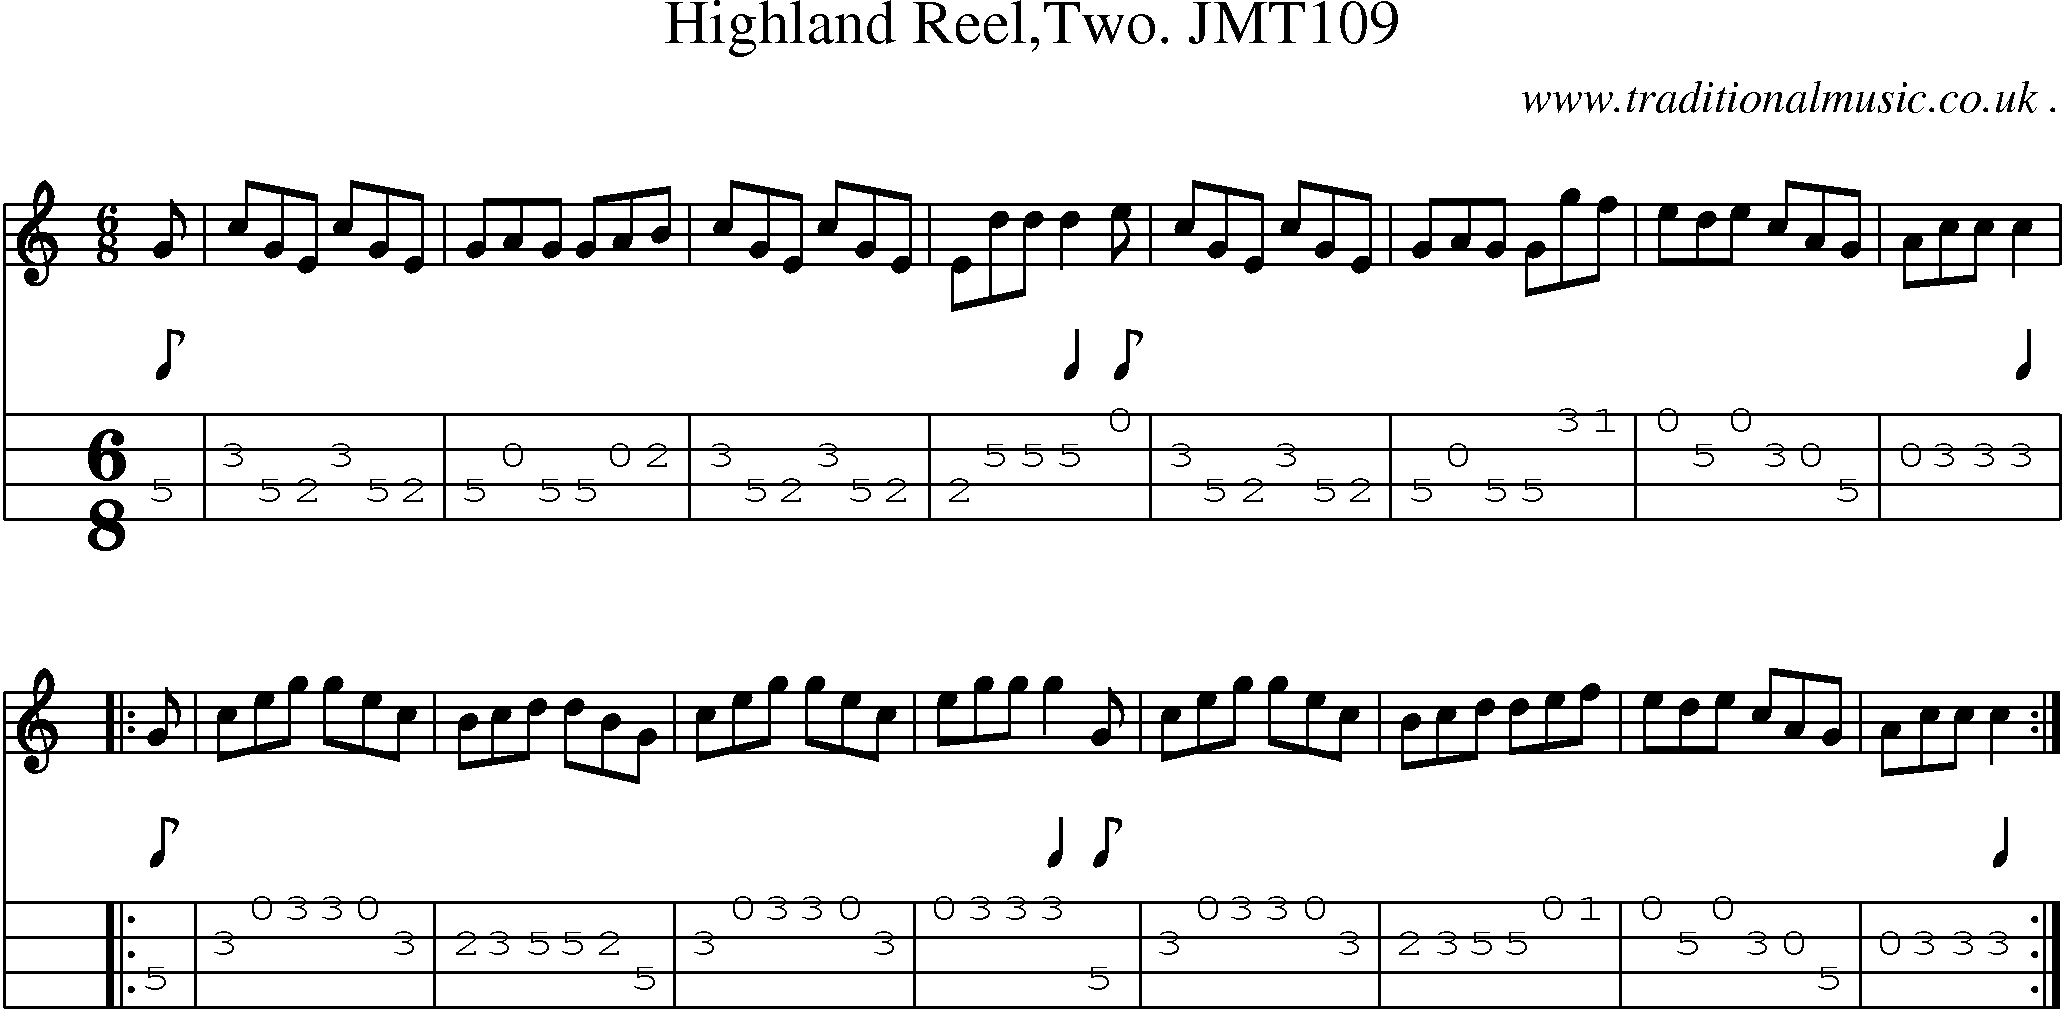 Sheet-music  score, Chords and Mandolin Tabs for Highland Reeltwo Jmt109